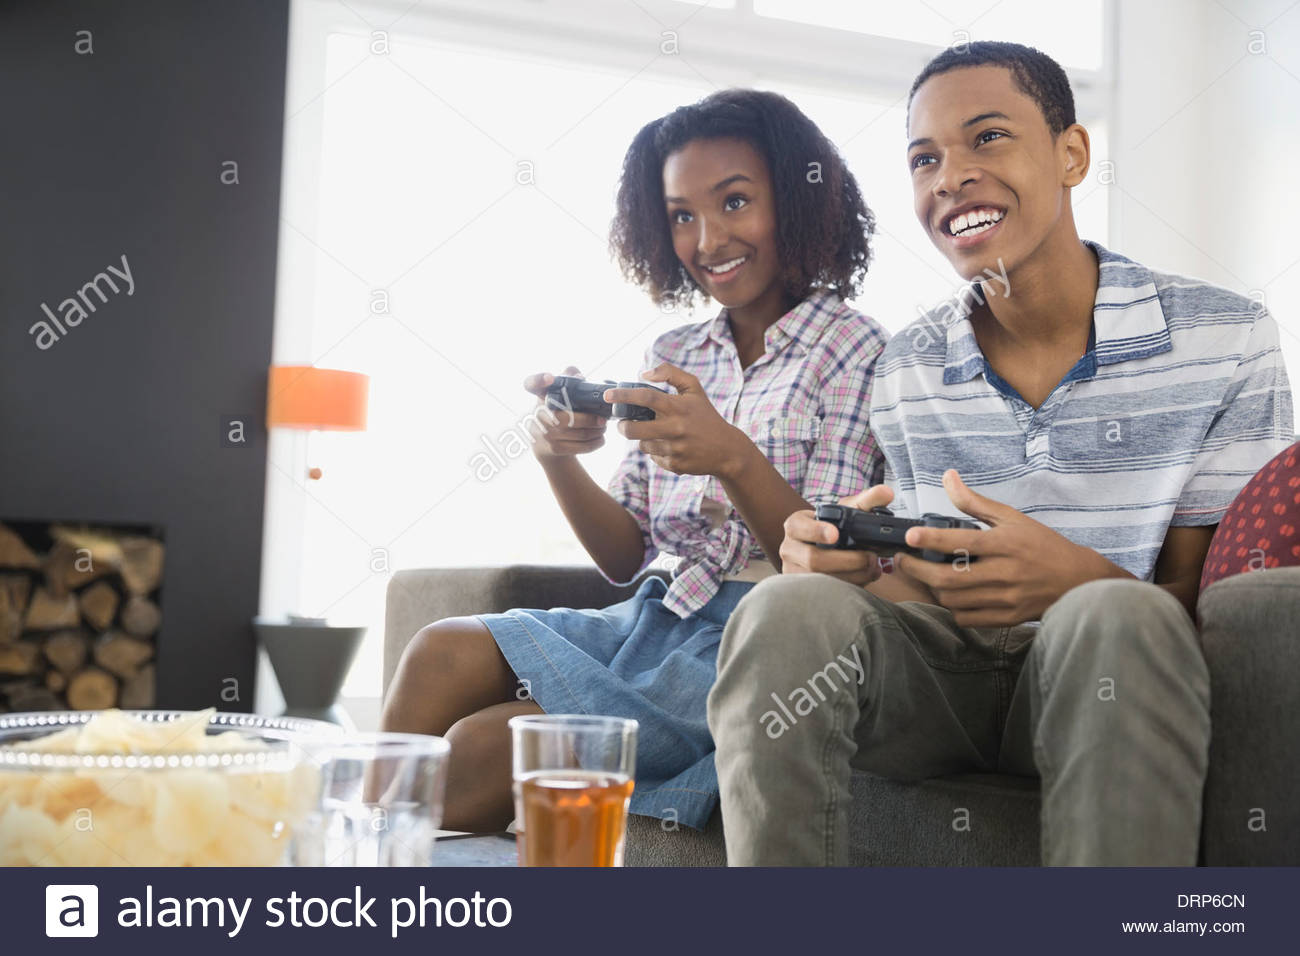 Siblings playing video games at home Stock Photo